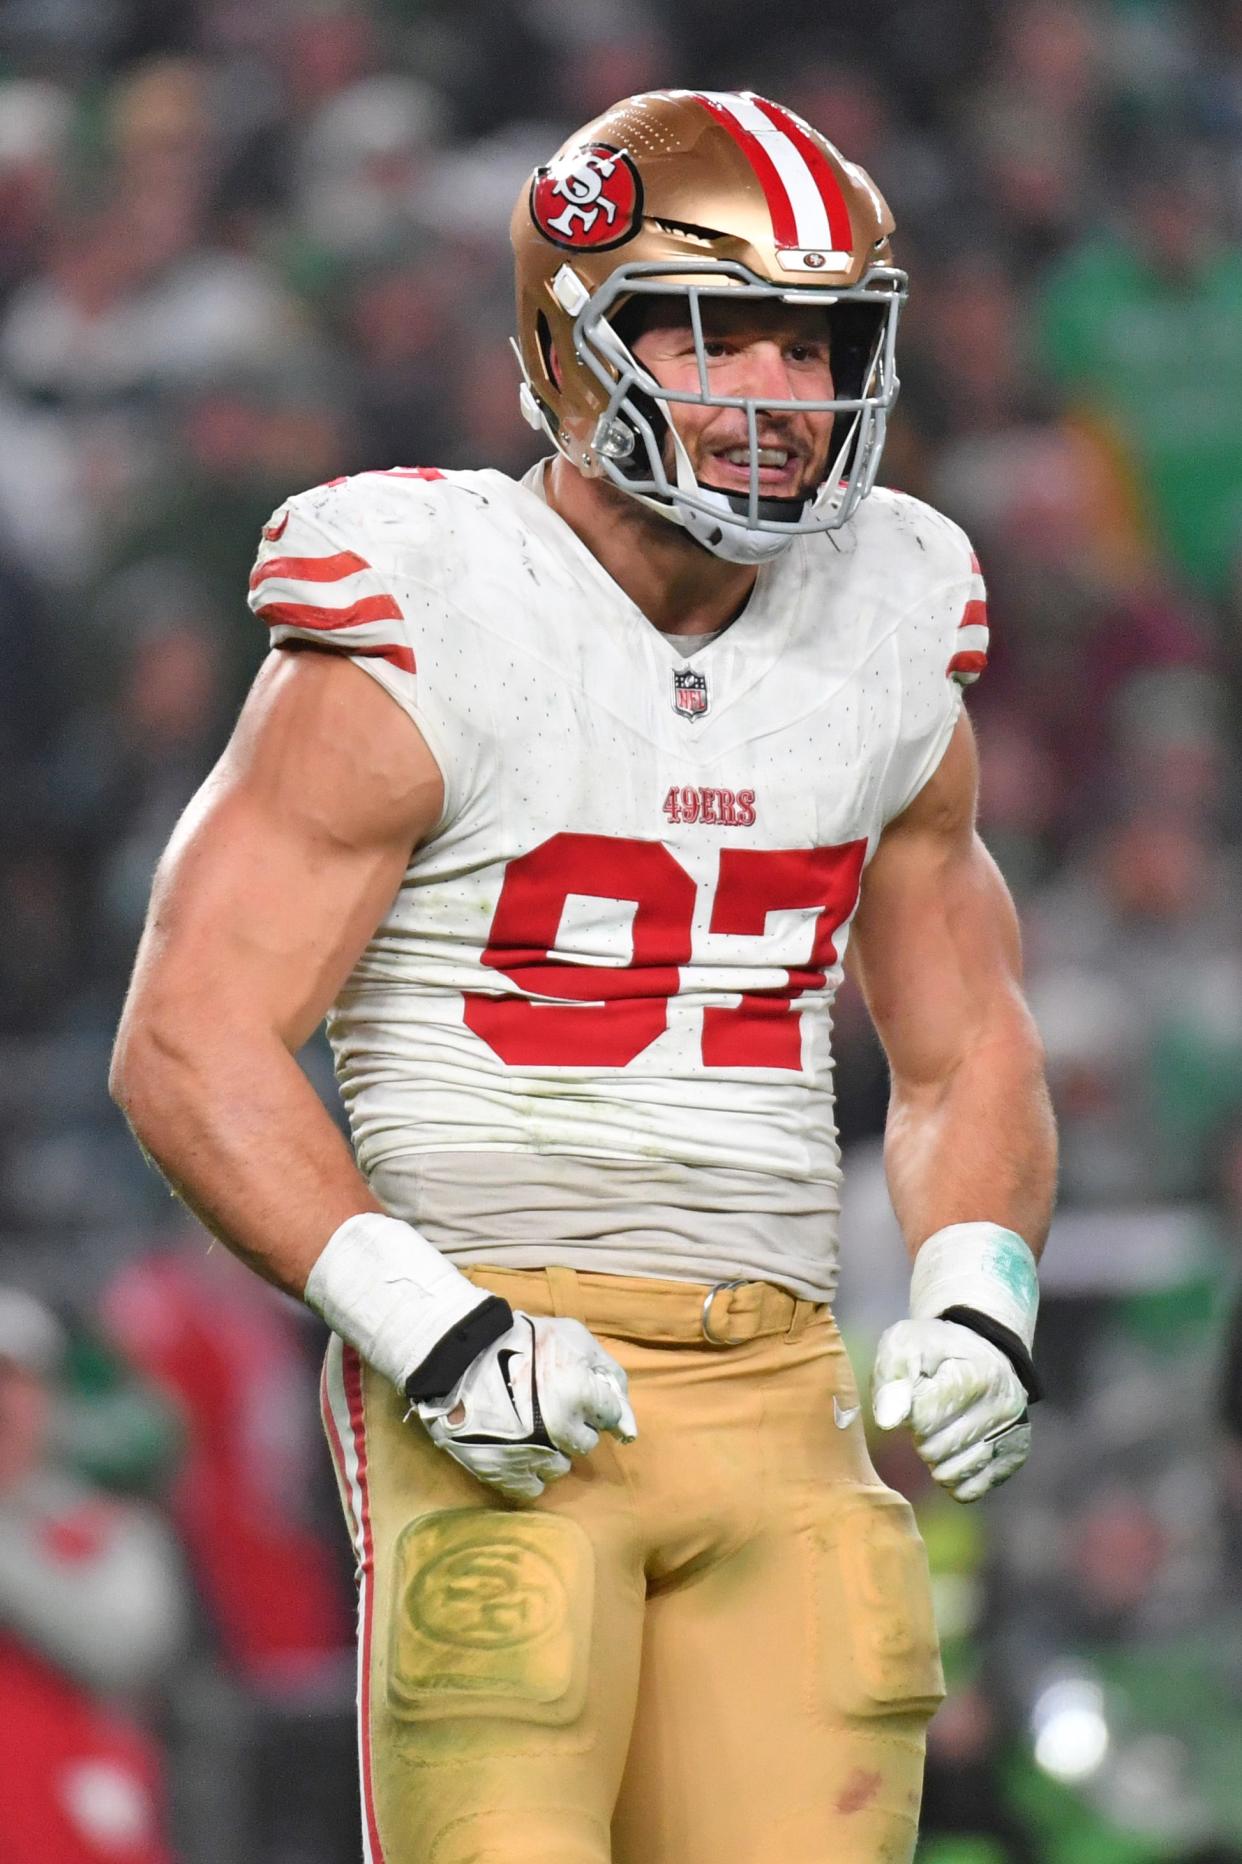 Nick Bosa is a four-time Pro Bowl honoree and the reigning NFL Defensive Player of the Year.